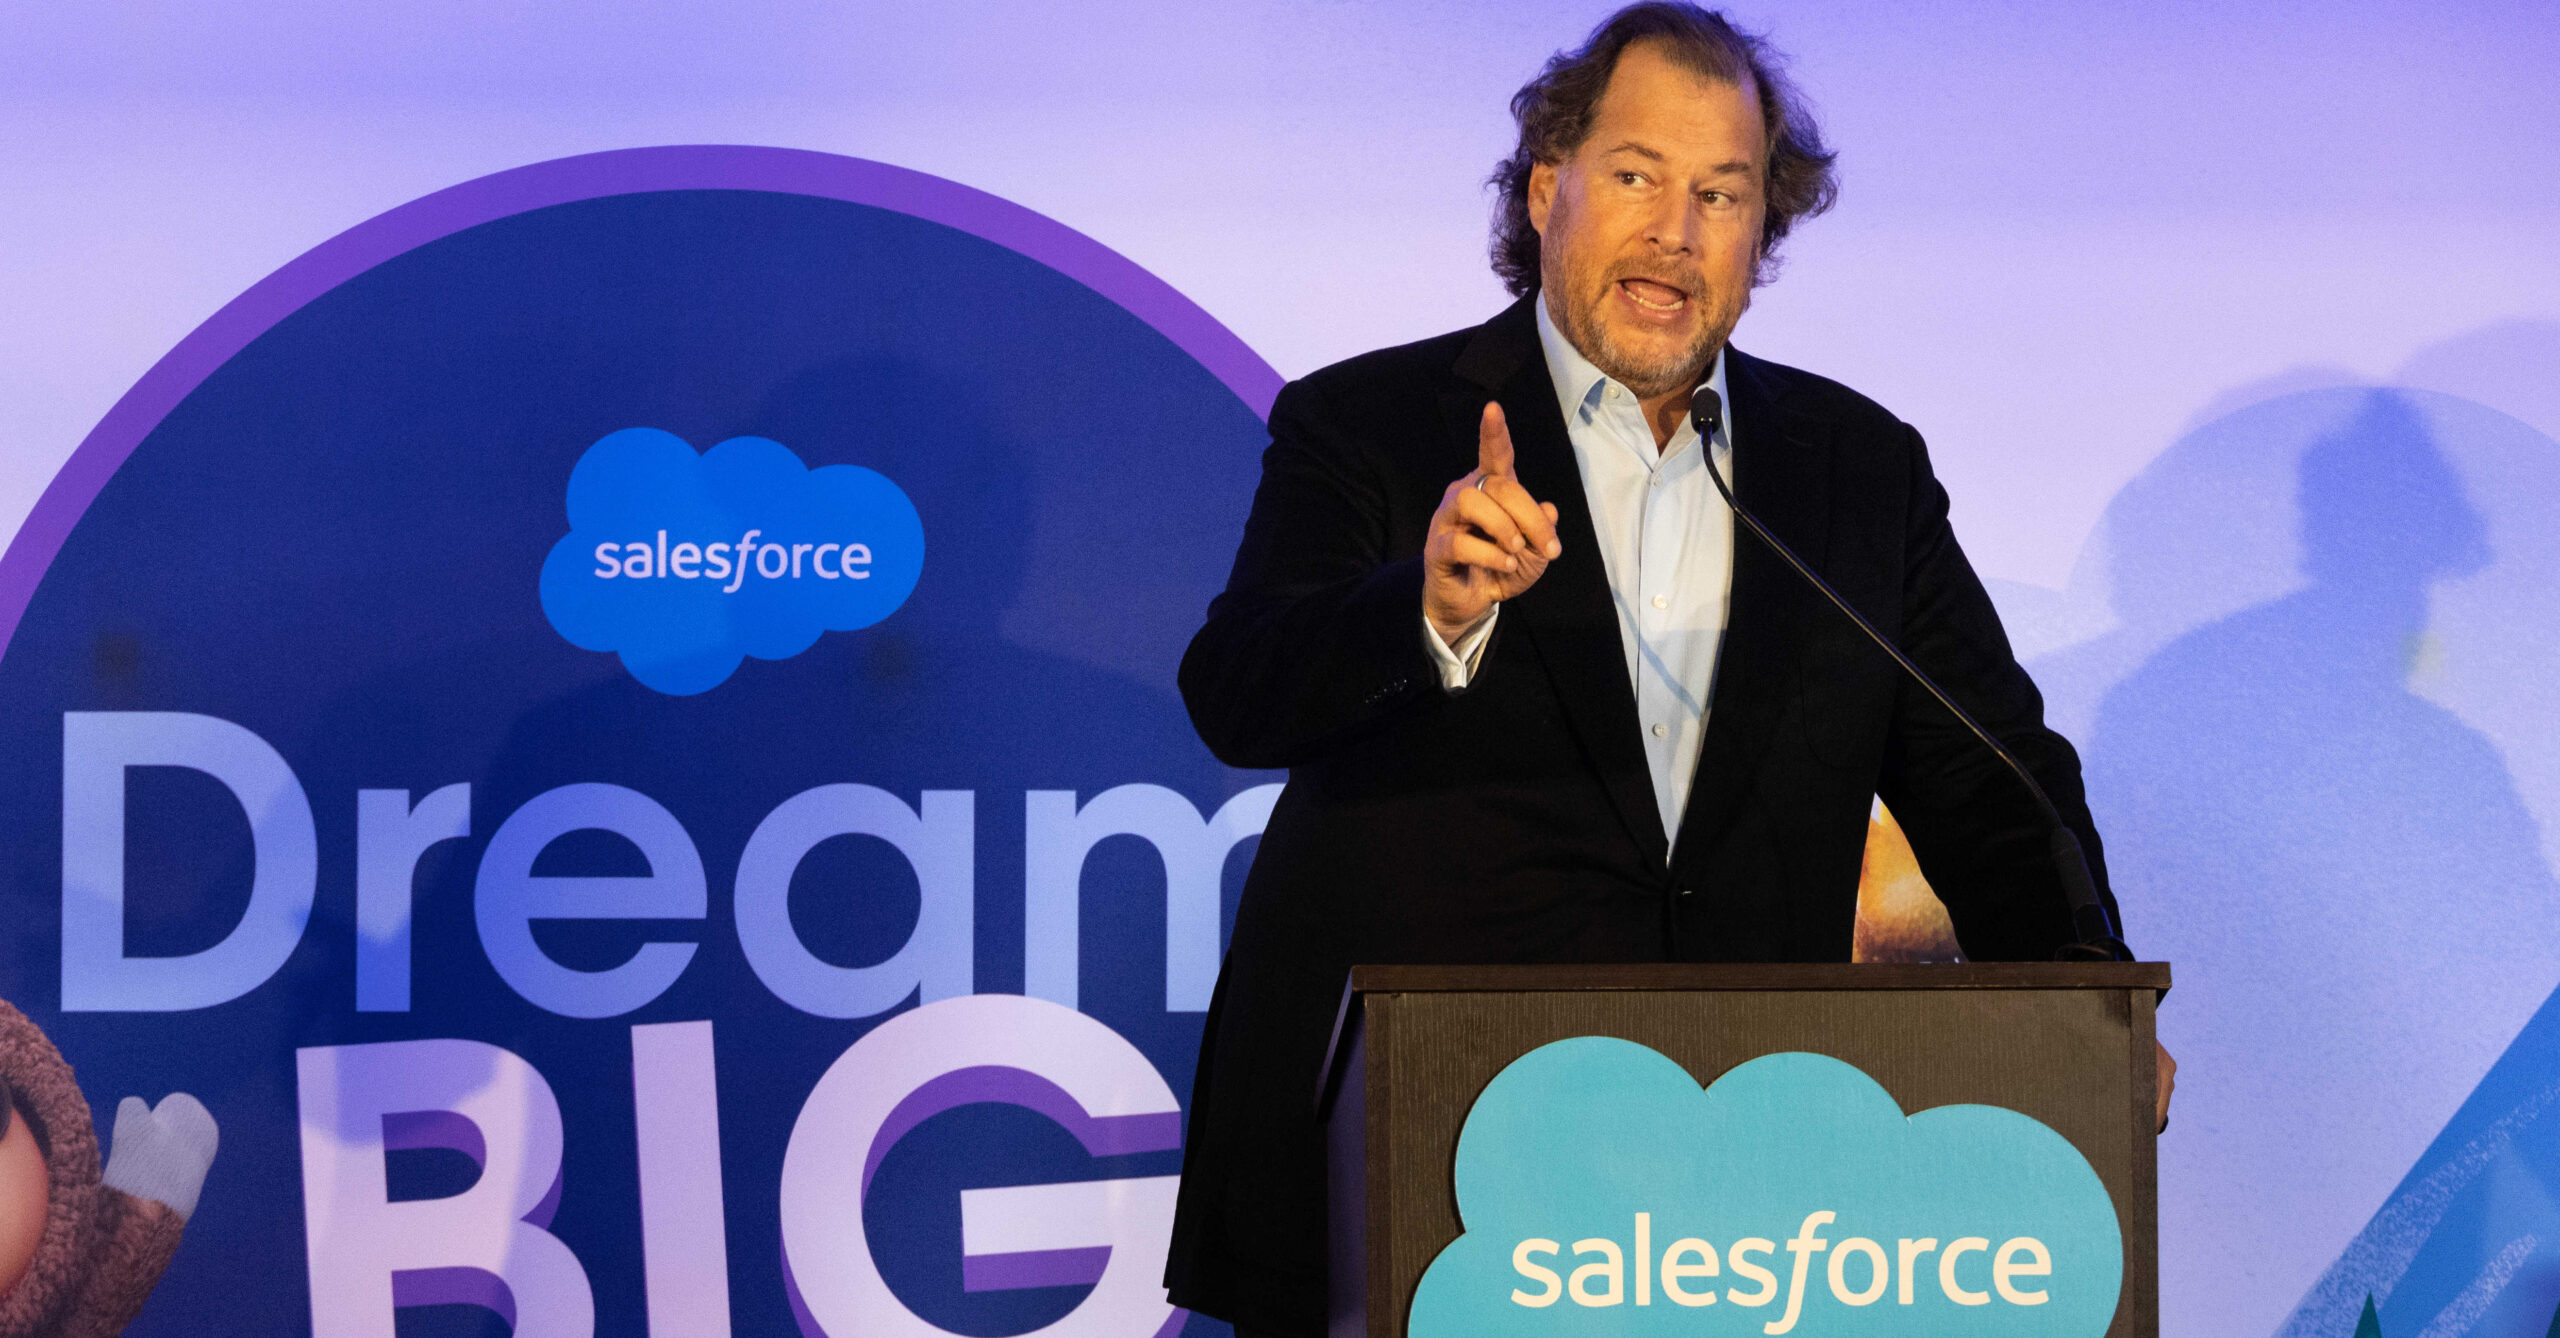 Salesforce Cuts 10% of Staff, Closes Offices in Huge Restructuring